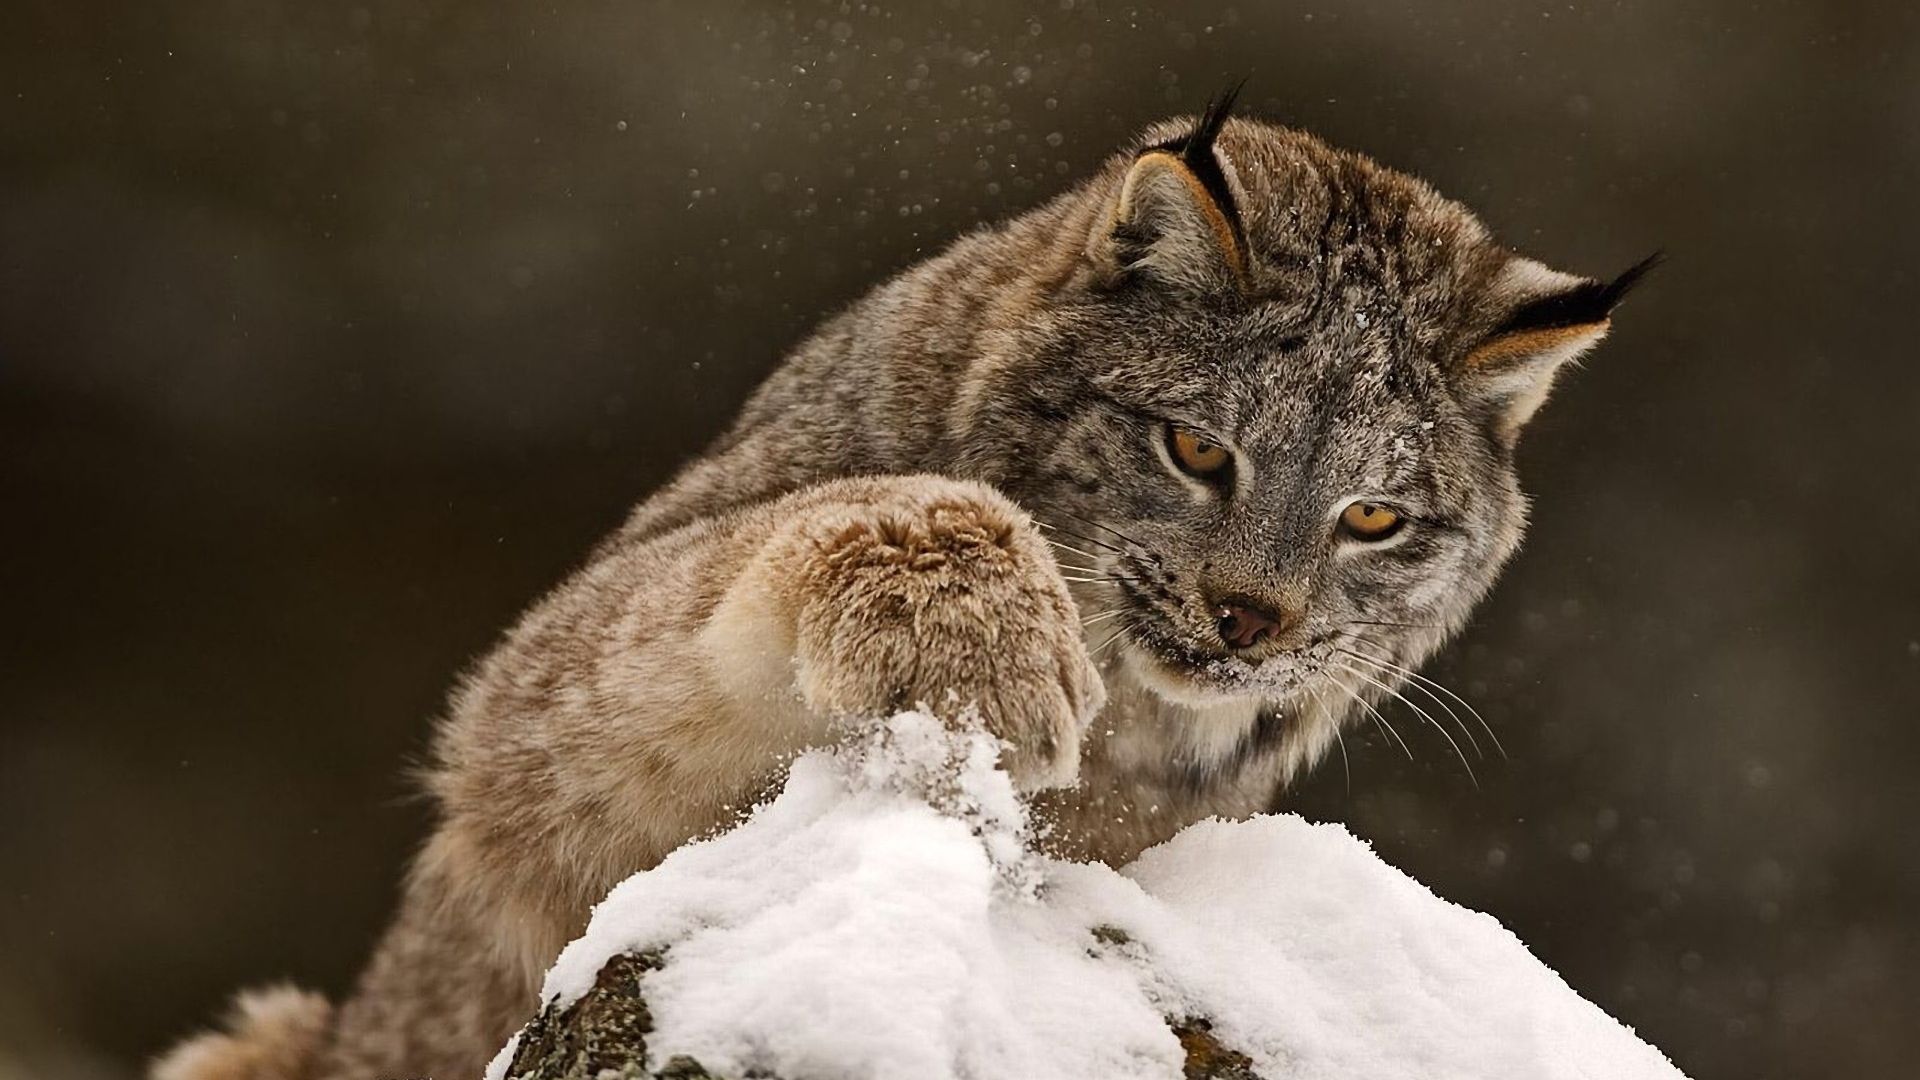 Wallpaper Play with snow, lynx, wild cat